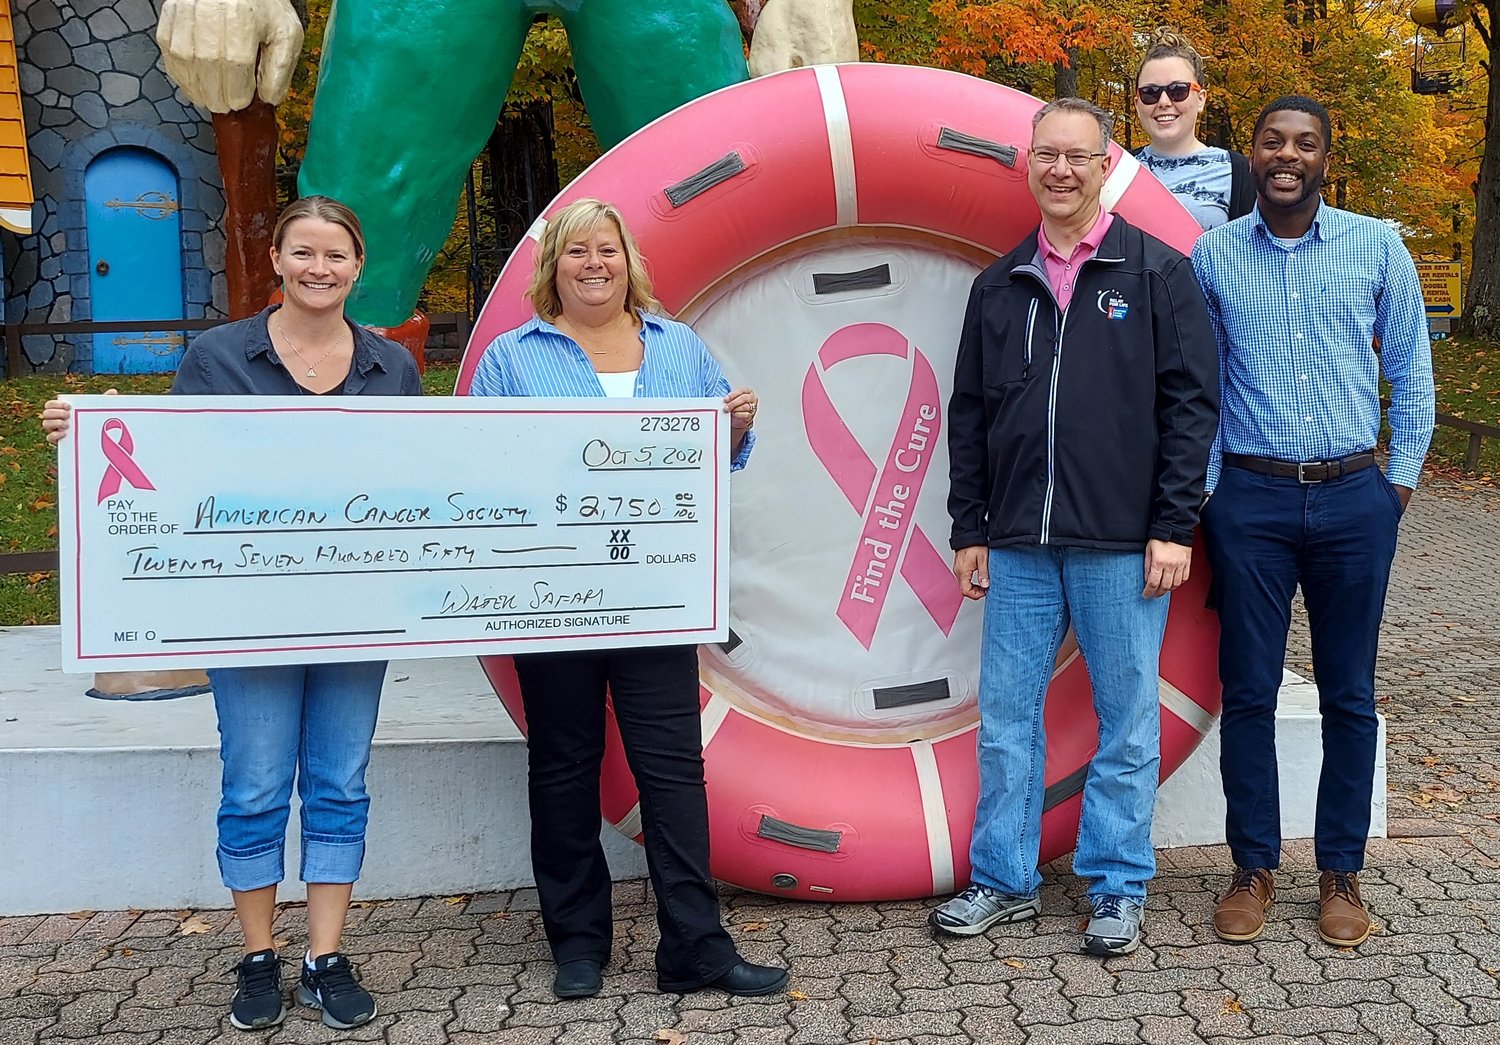 MAKING A SPLASH — Enchanted Forest Water Safari makes a donation of $2,750 to the local chapter of the American Cancer Society to assist with the organization’s efforts to support individuals with cancer. From left: Katie Wojdyla and Kelly Greene, of Enchanted Forest Water Safari; Robert Elinskas, of the American Cancer Society; and Kelsey Clark and Richard Blackshear, of Enchanted Forest Water Safari.